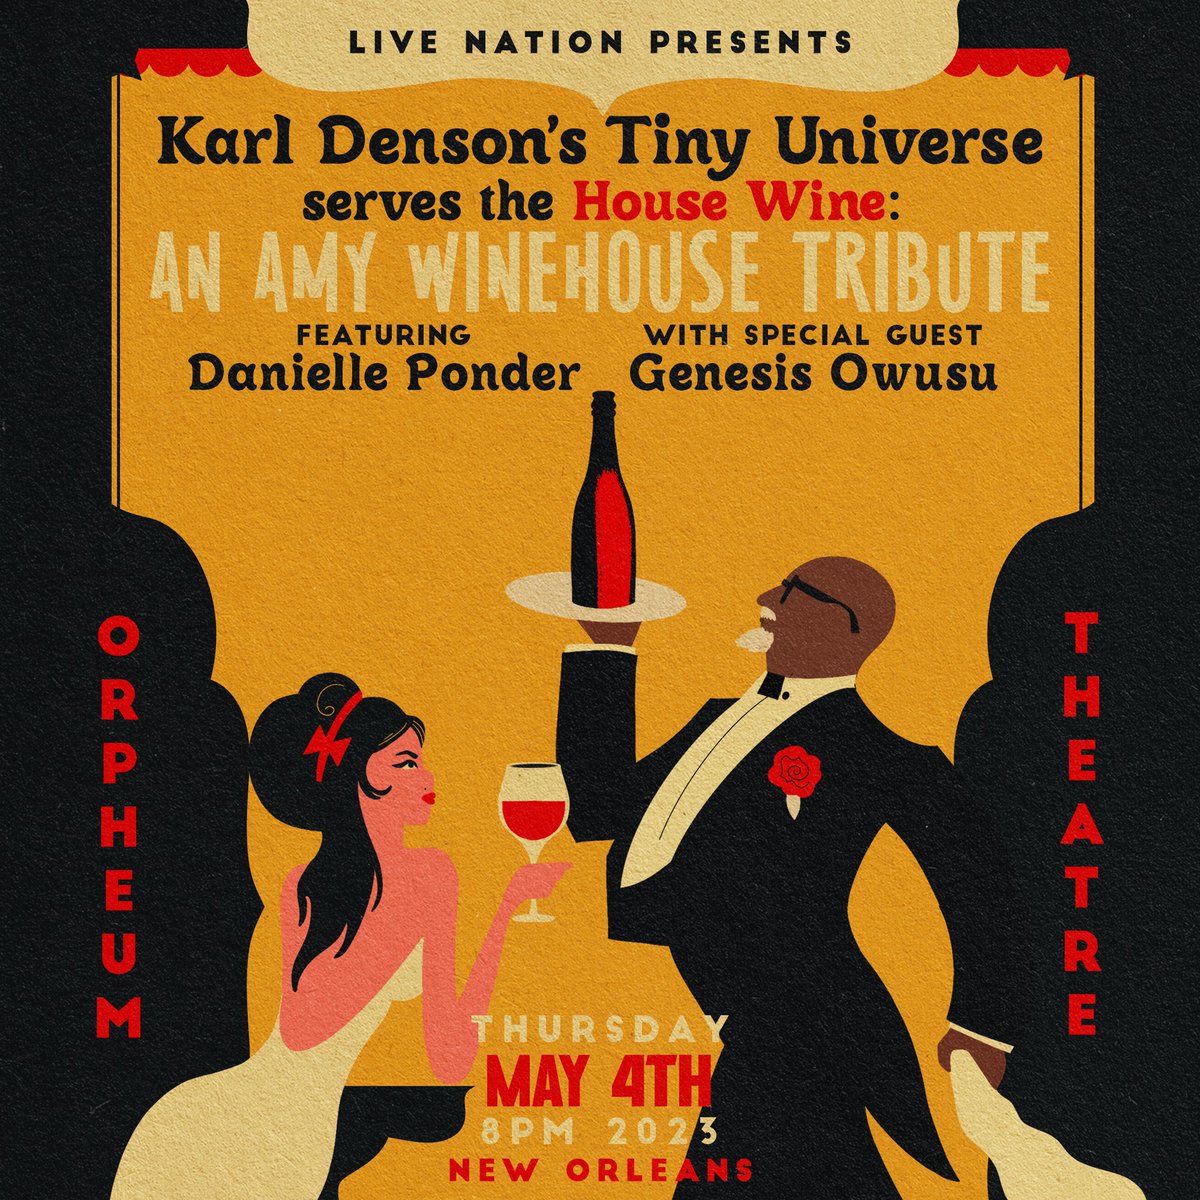 May 4 KDTU serves the House Wine: An Amy Winehouse tribute with the amazing @danielleponder1 & @genesisowusu at the #OrpheumTheater. Let’s celebrate this music together y’all, gone too soon but the love lasts forever. See you at the fest! Tix & Info - bit.ly/3KN858J